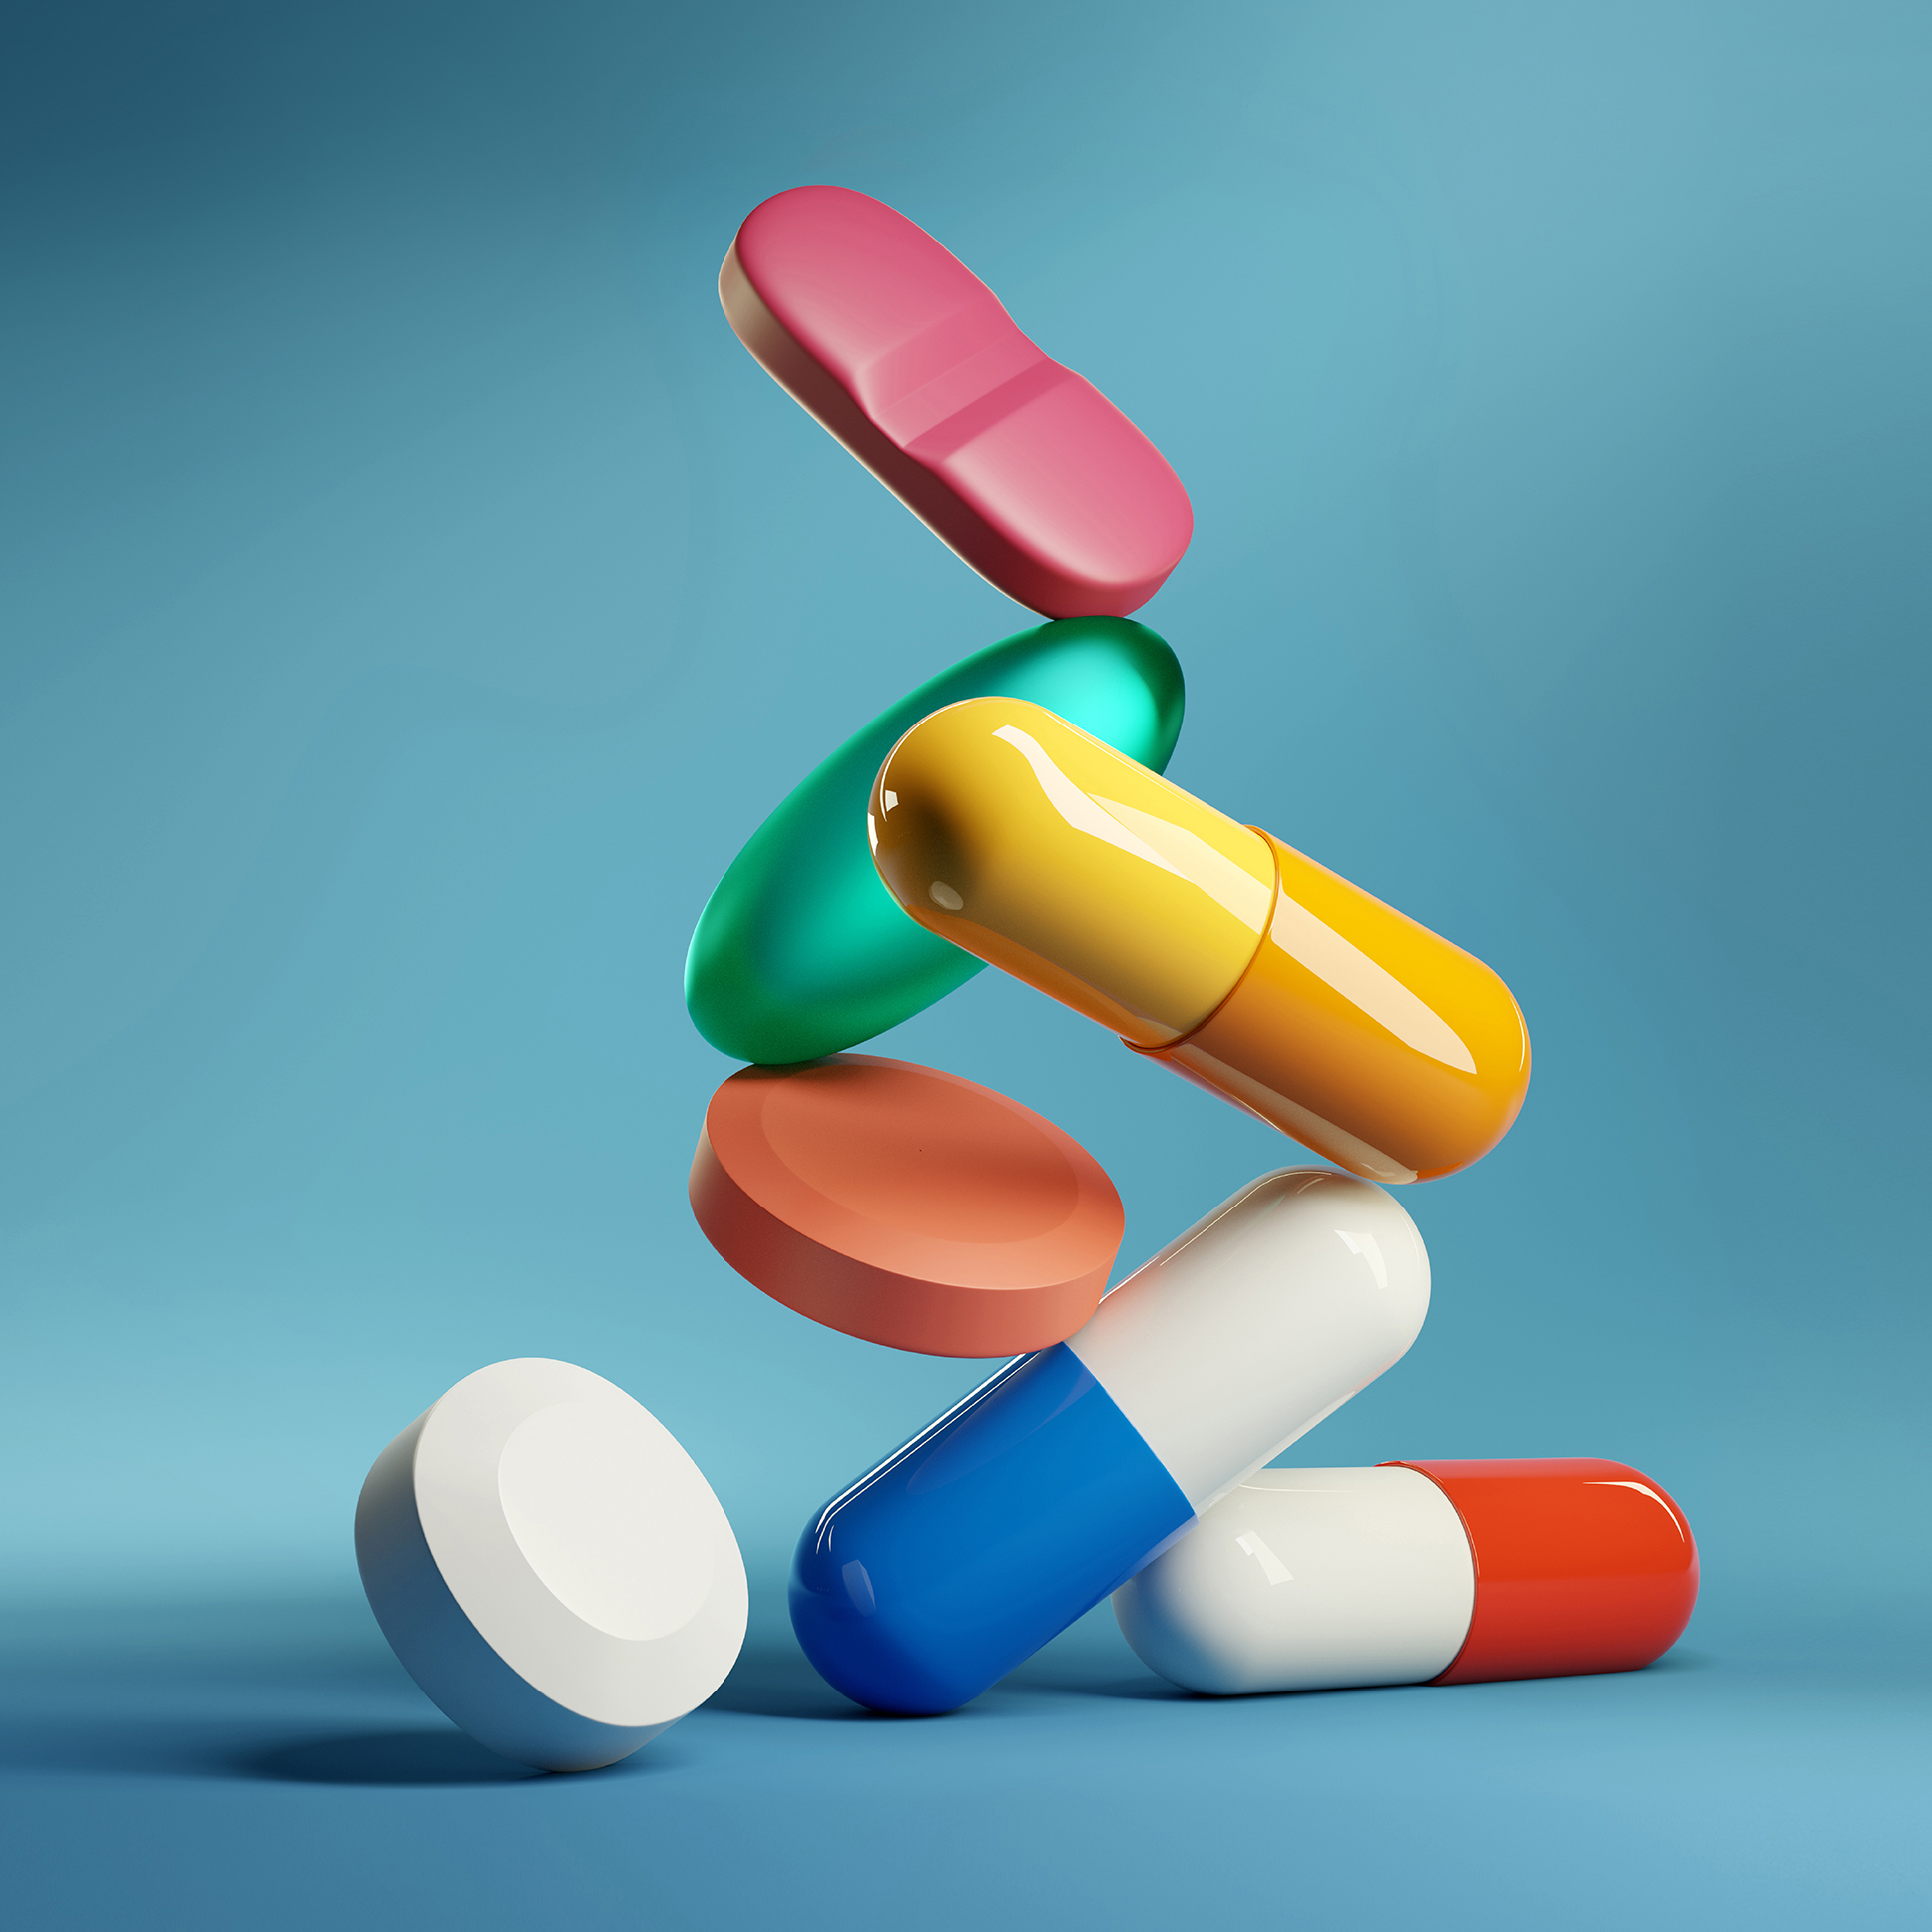 Optimizing Medication Safety in Primary Care & Outpatient Settings: An Interactive Series